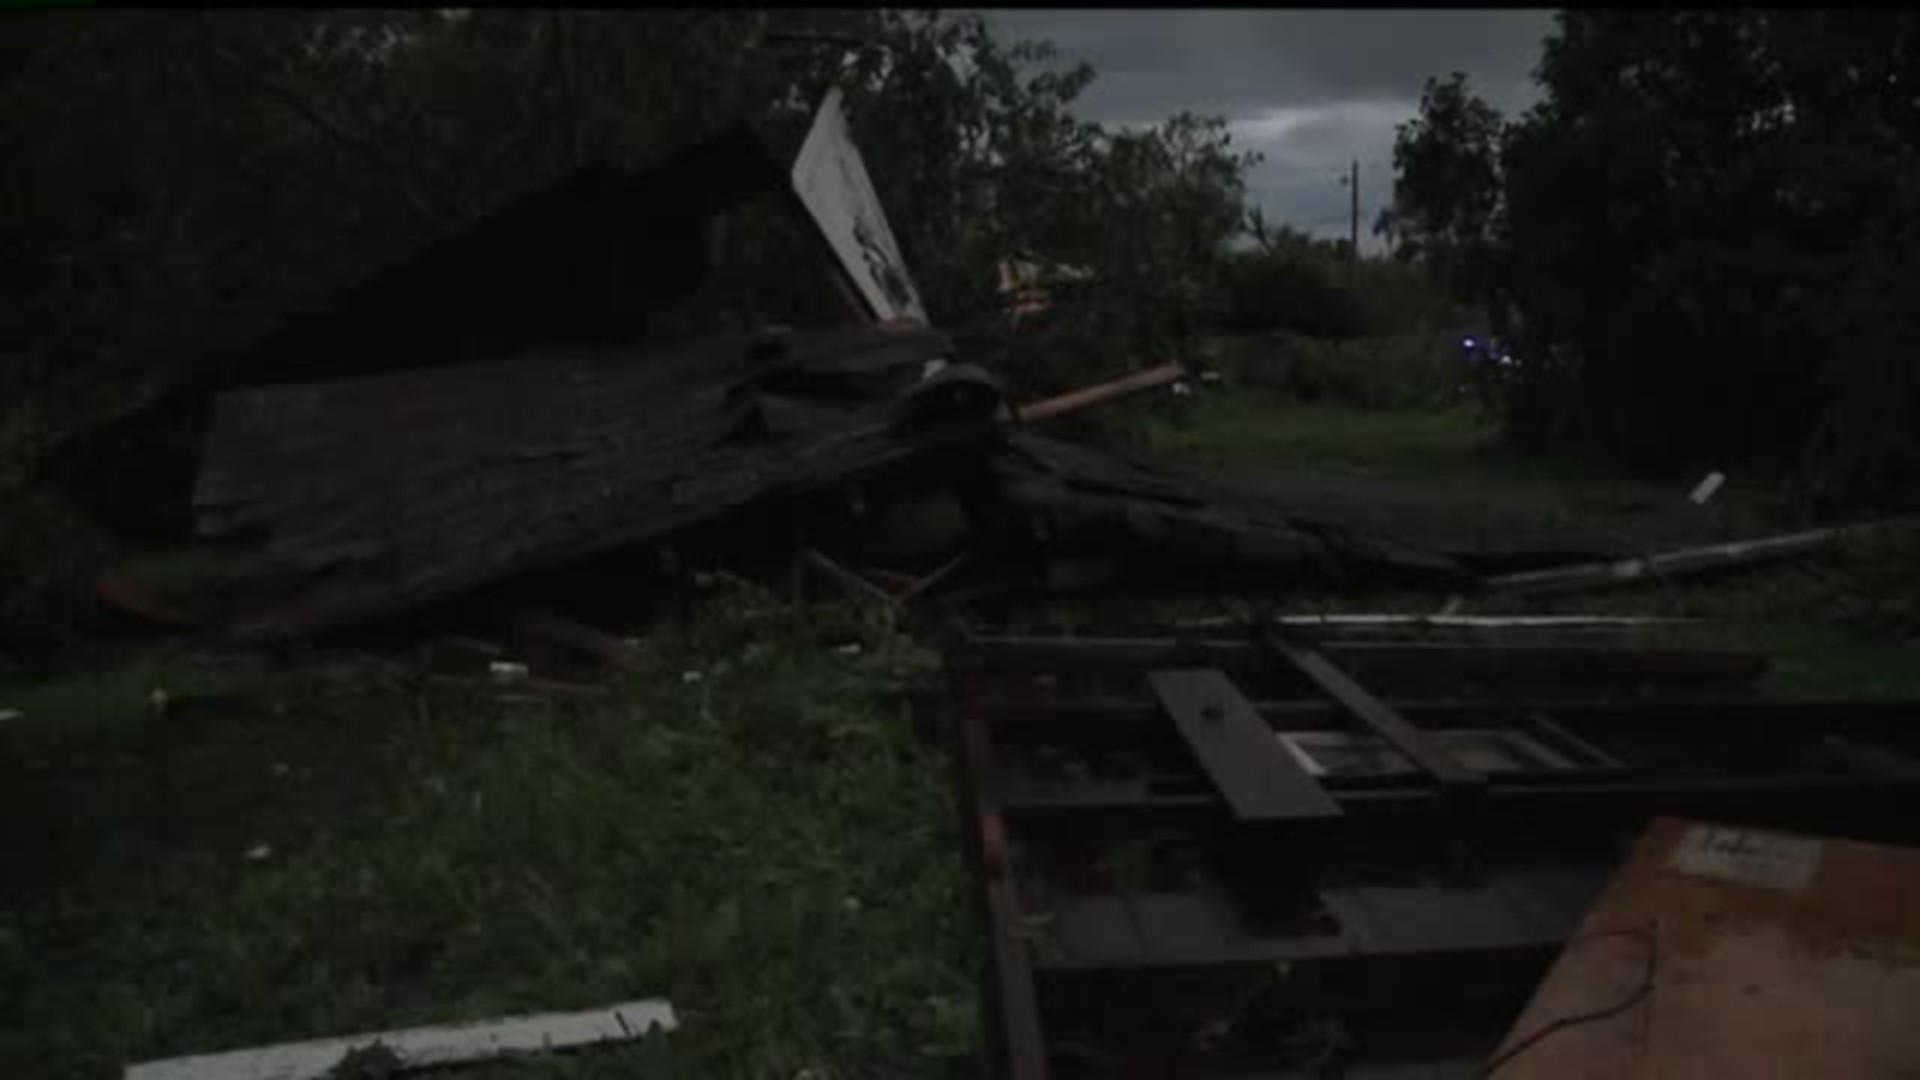 Cameron, Illinois hit hard in severe storms